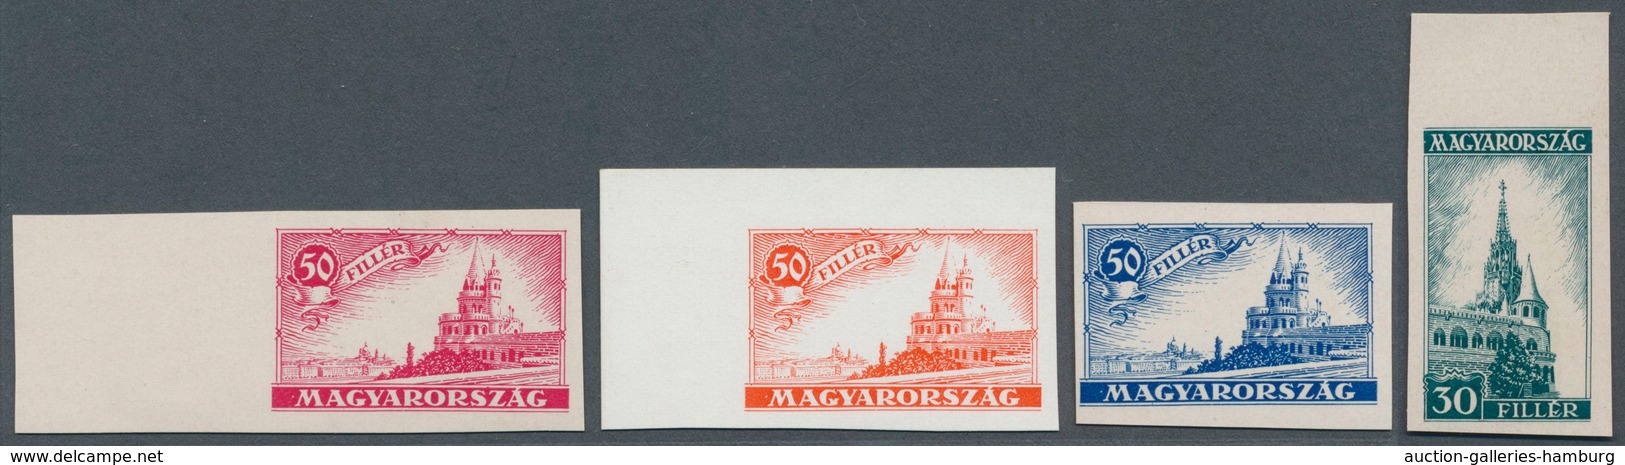 Ungarn: 1926: "30 FILLER MAGYARORSZAG" Or "50 FILLER" Showing The Matthias Cathedral ECKERLIN ESSAYS - Lettres & Documents